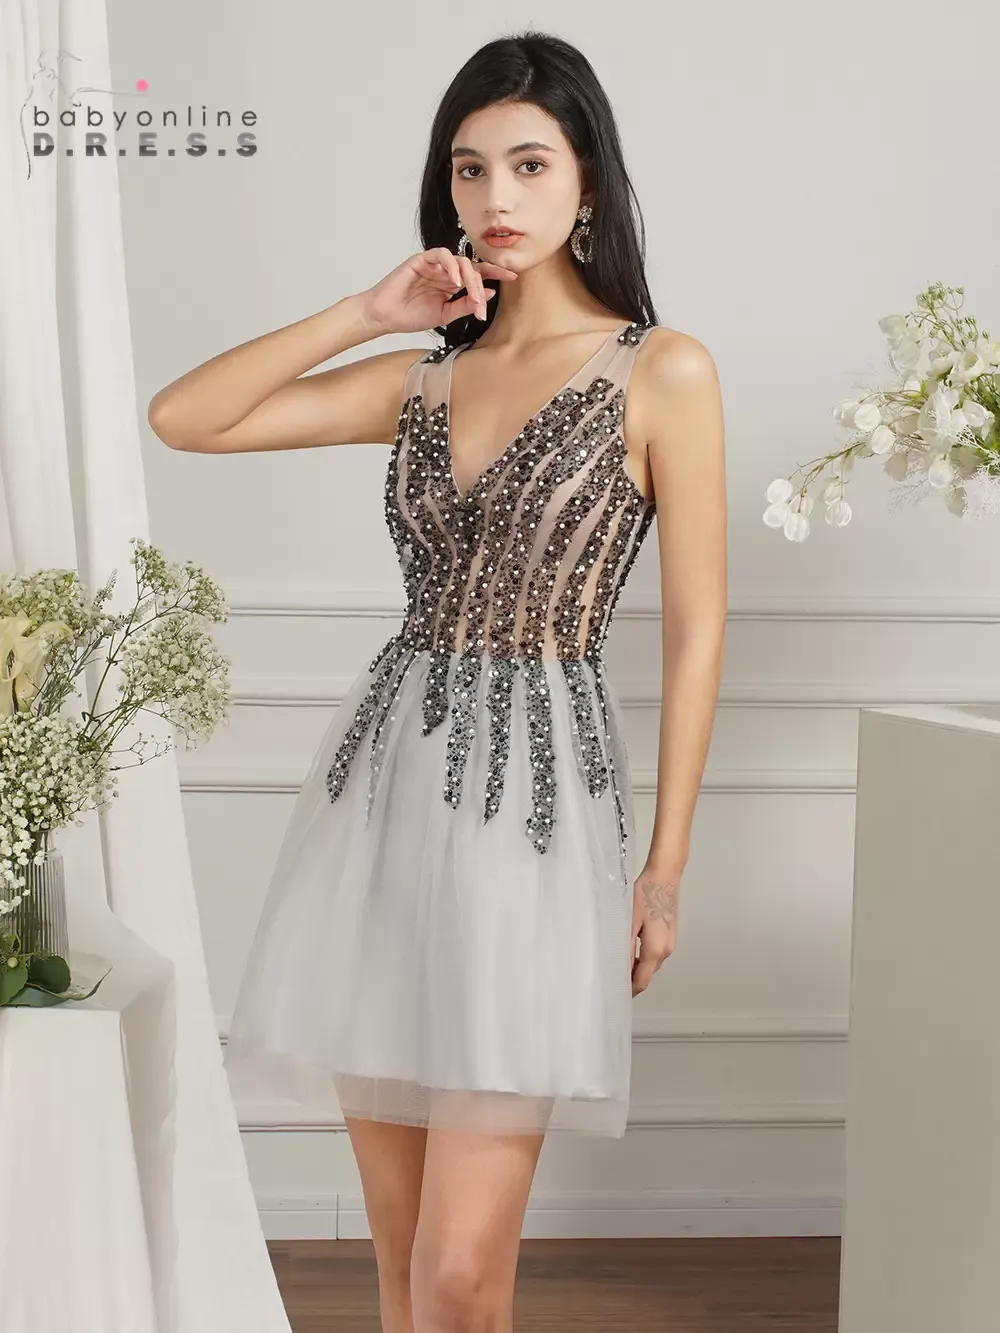 Sequins Tulle Mini Short Cocktail Party Dresses 2022 Women A-line V-neck Sleeveless Pearls Elegant Female Homecoming Prom Evening Gowns Vestidos cps3005